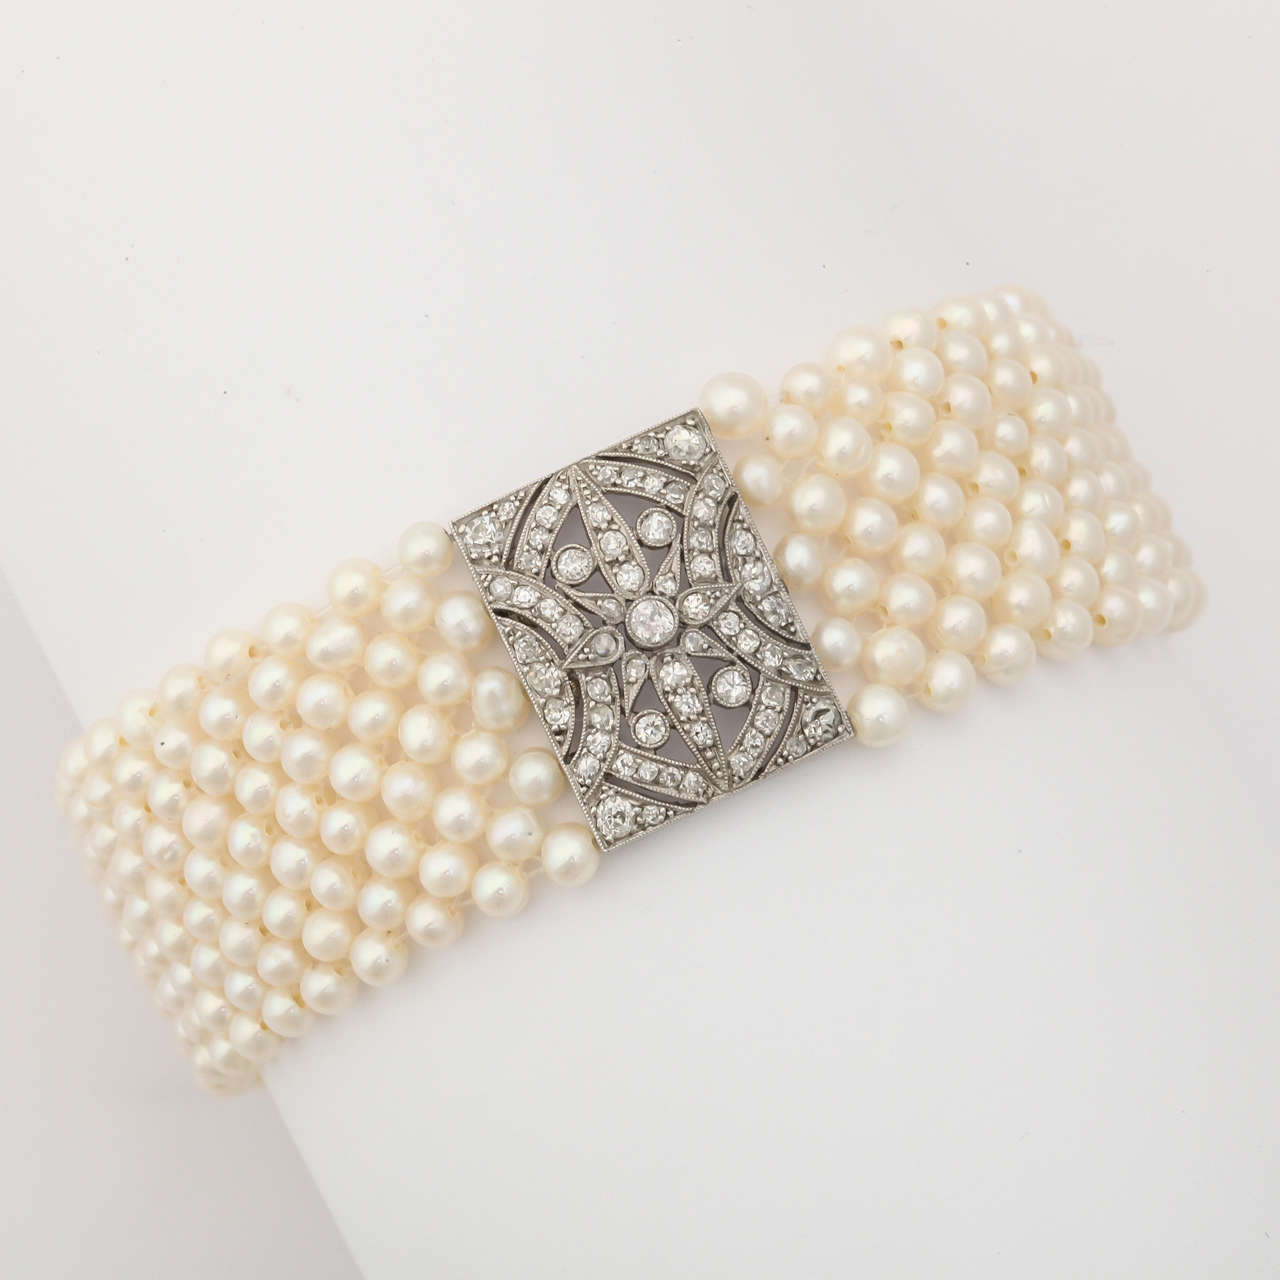 Classic in its design, this delicate bracelet features many 2mm tiny cultured high quality pearls and a wonderful platinum and diamond slide clasp. The center of the bracelet features a beautiful open work diamond & platinum rectangular plaque